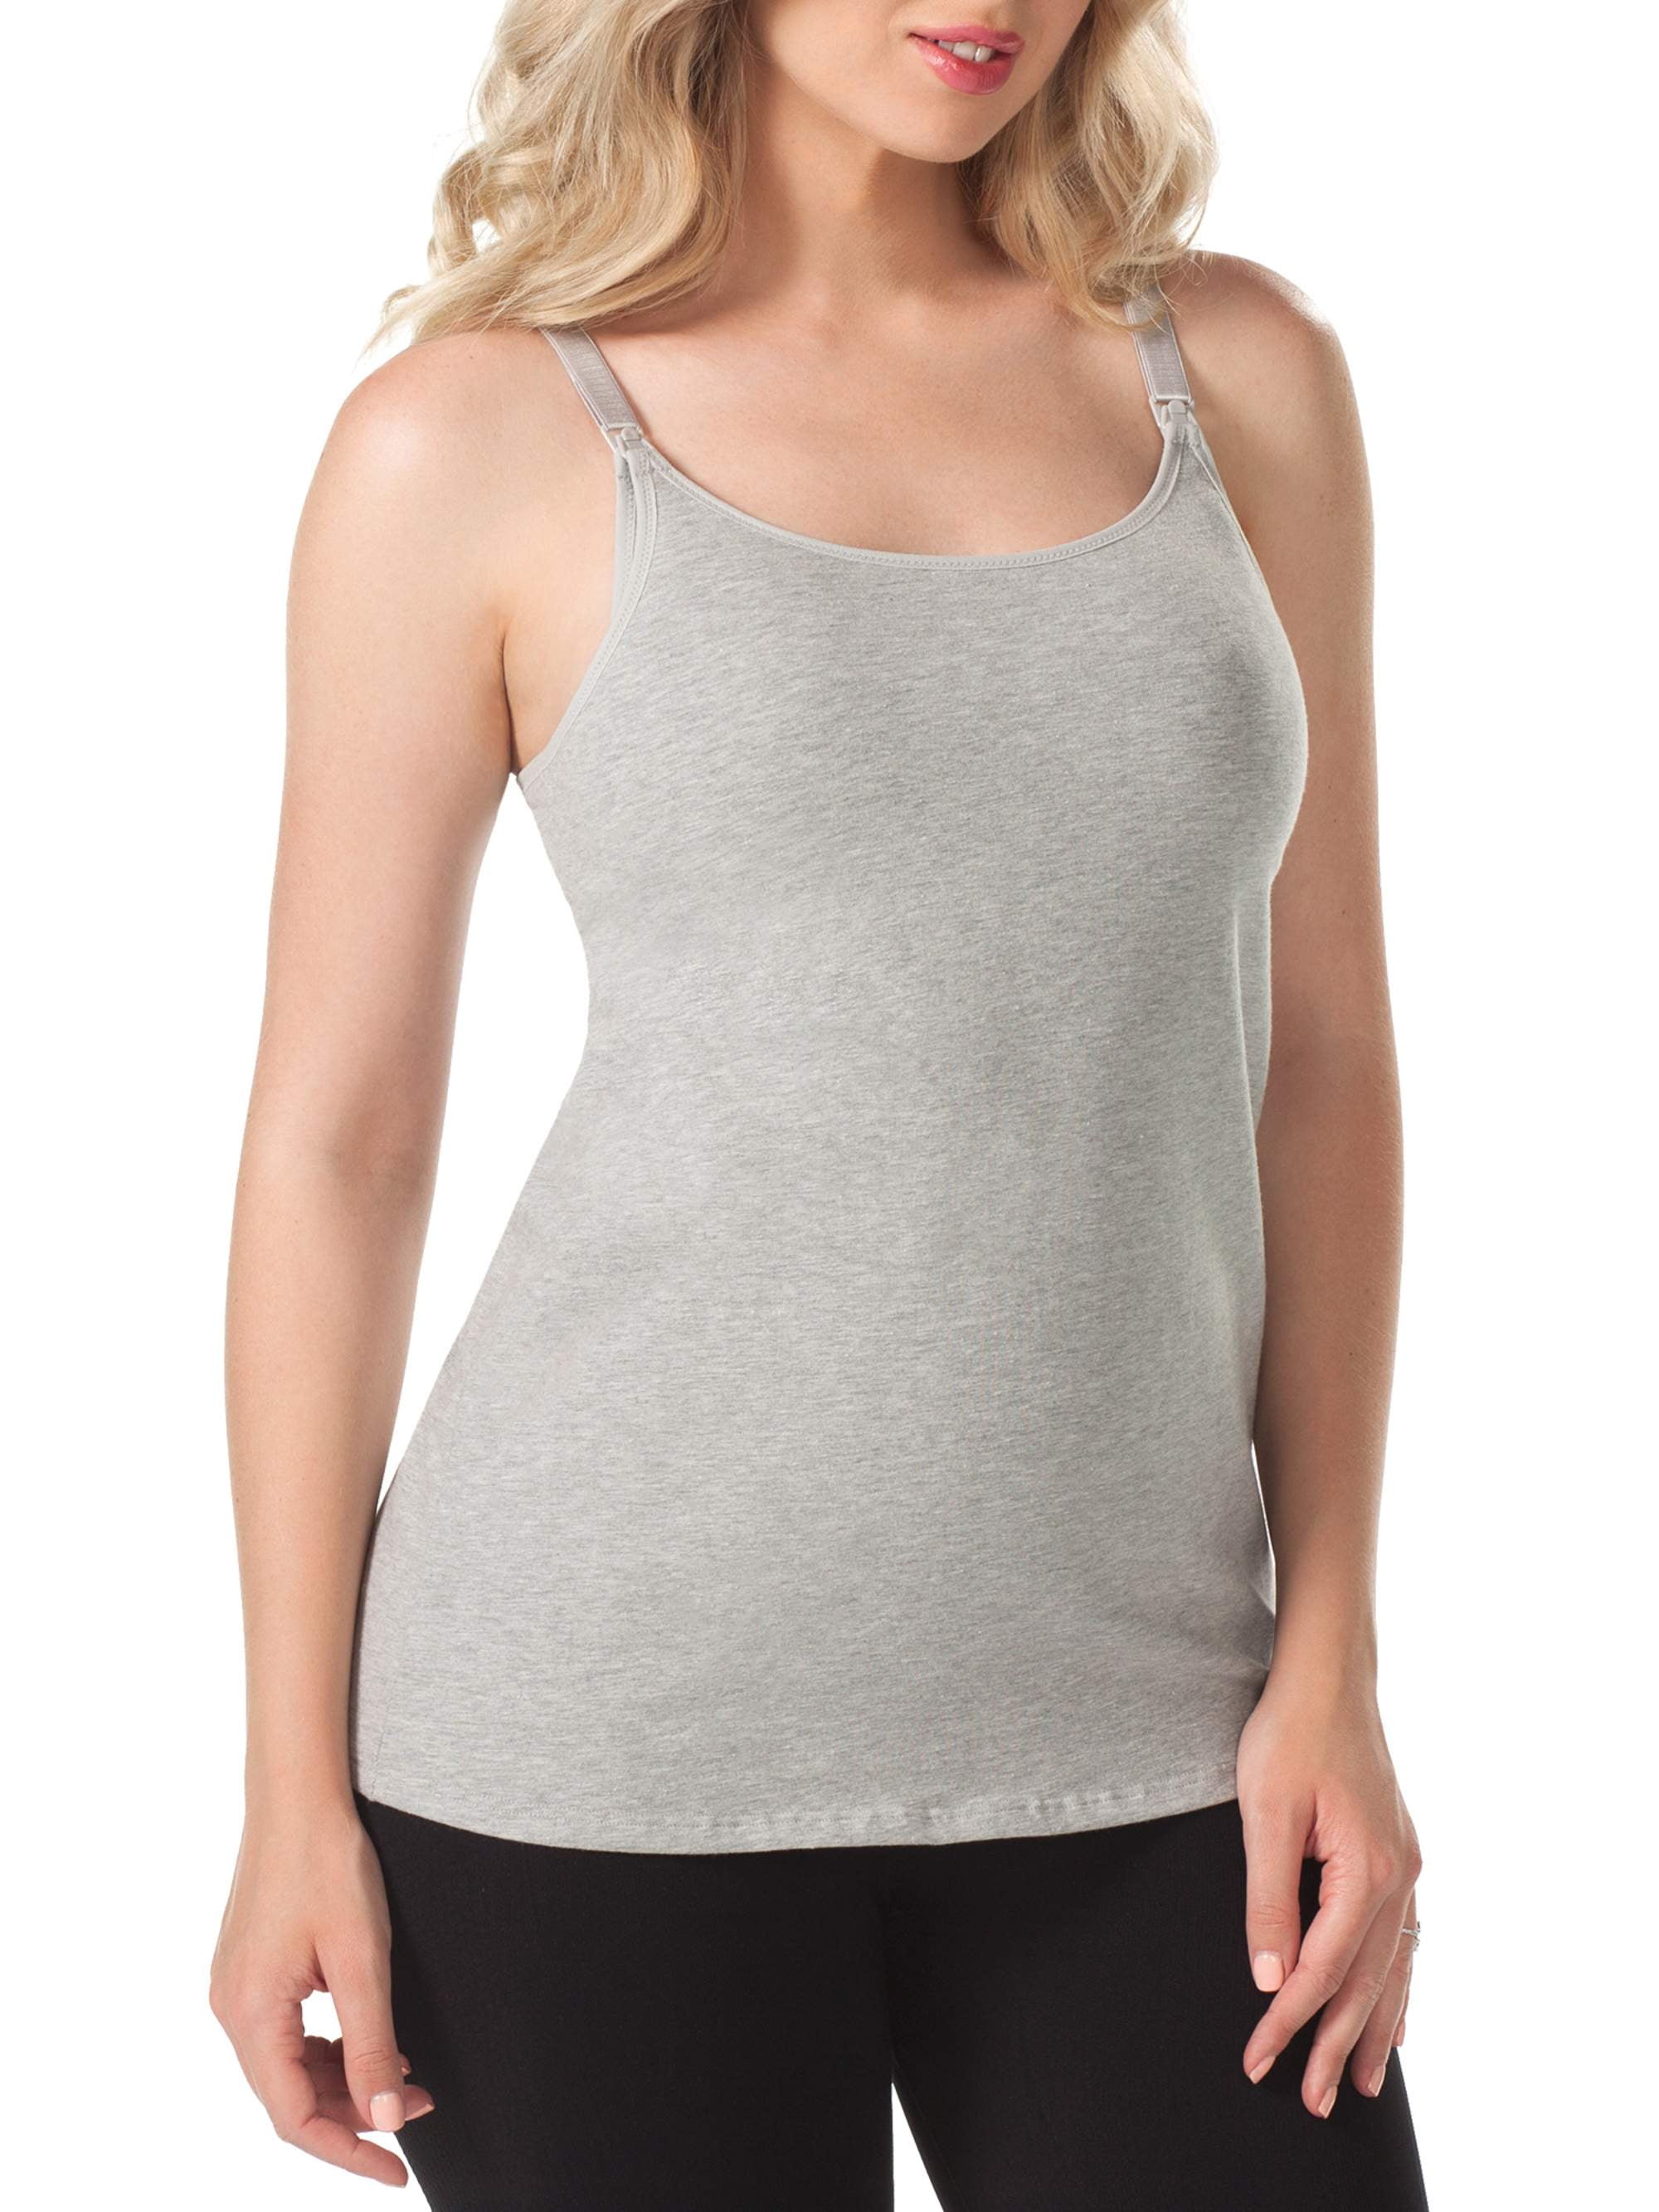 4HOW Womens Basic Maternity Nursing Cami Tank Top Shirt with Built in Bra